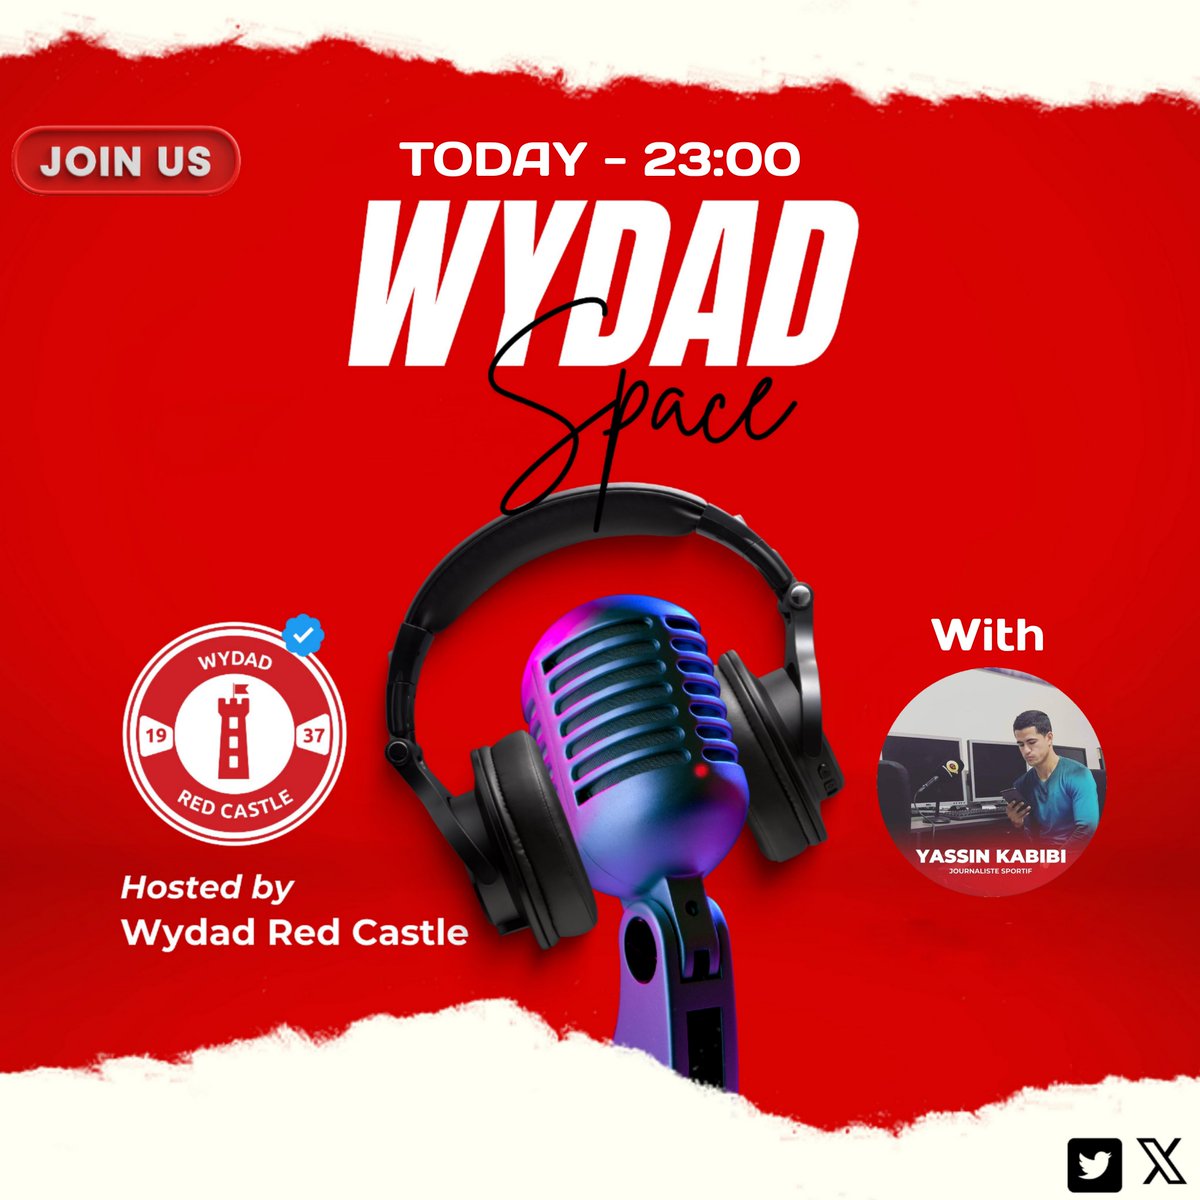 Wydad Space with Yassin Kabibi and Dr Salem 🇪🇬 

Today , 23h 🇲🇦